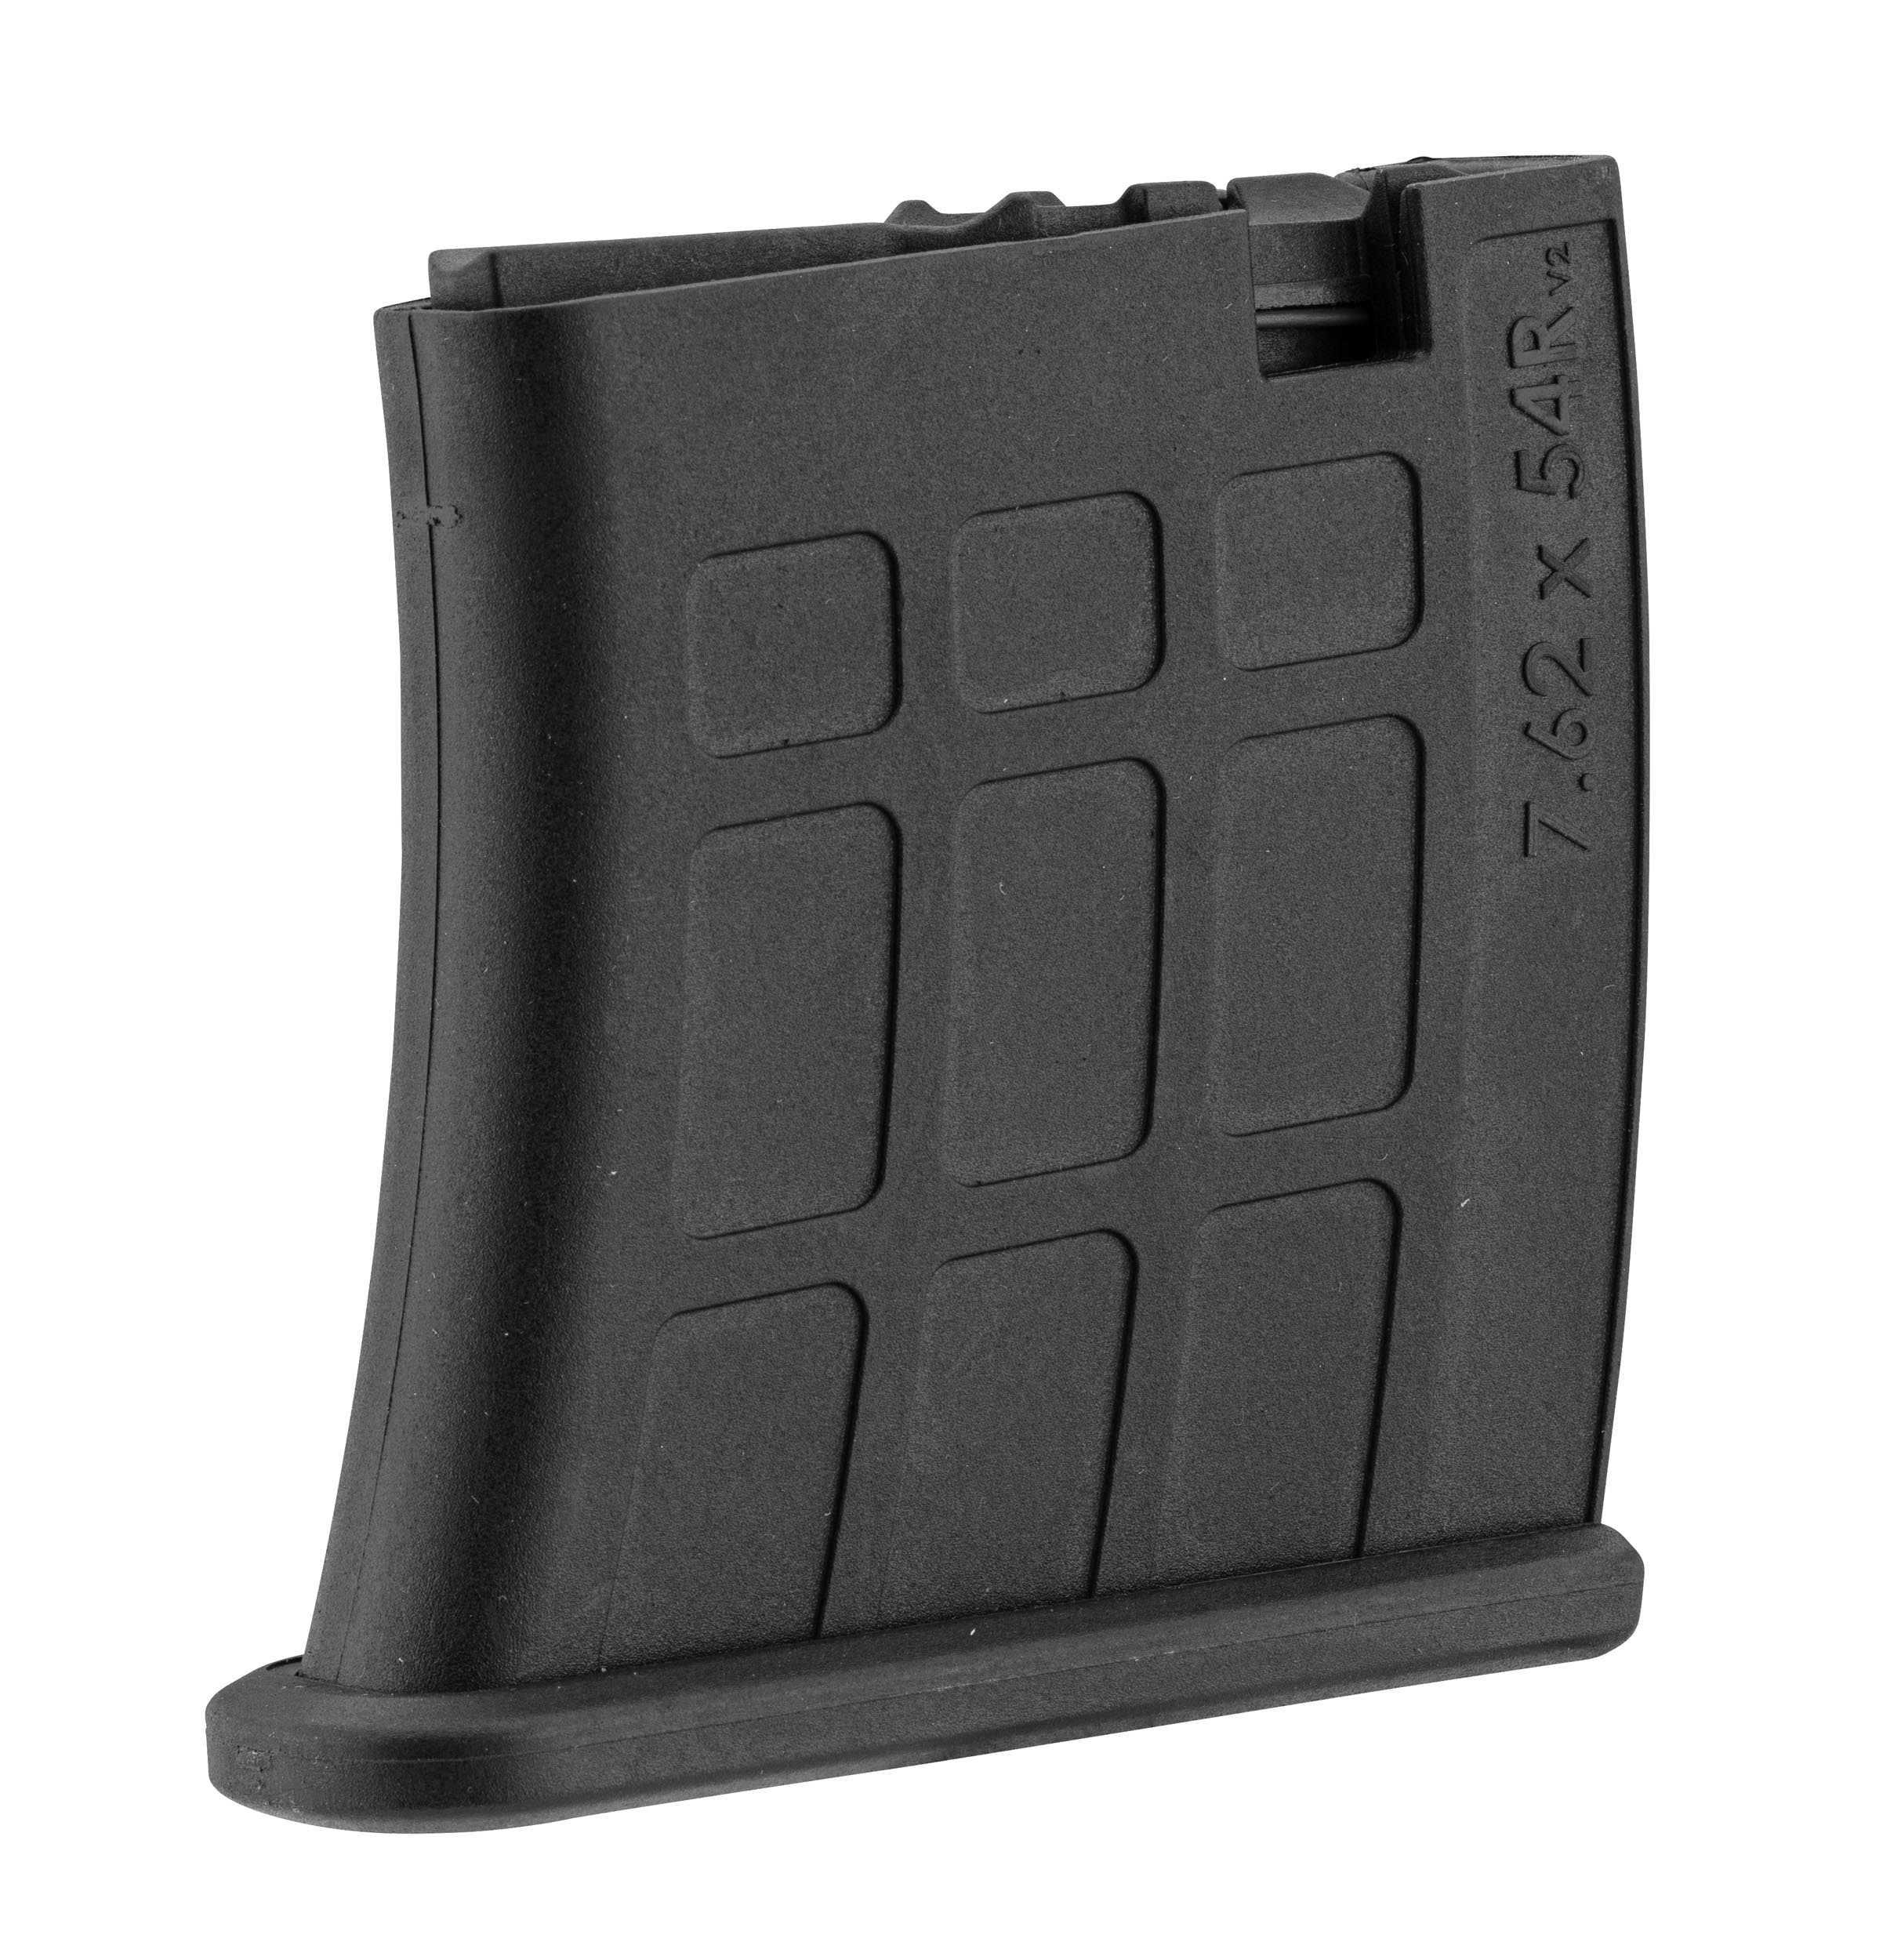 CIVA120-5 Chargeur OPFOR 7.62x54R 5 coups